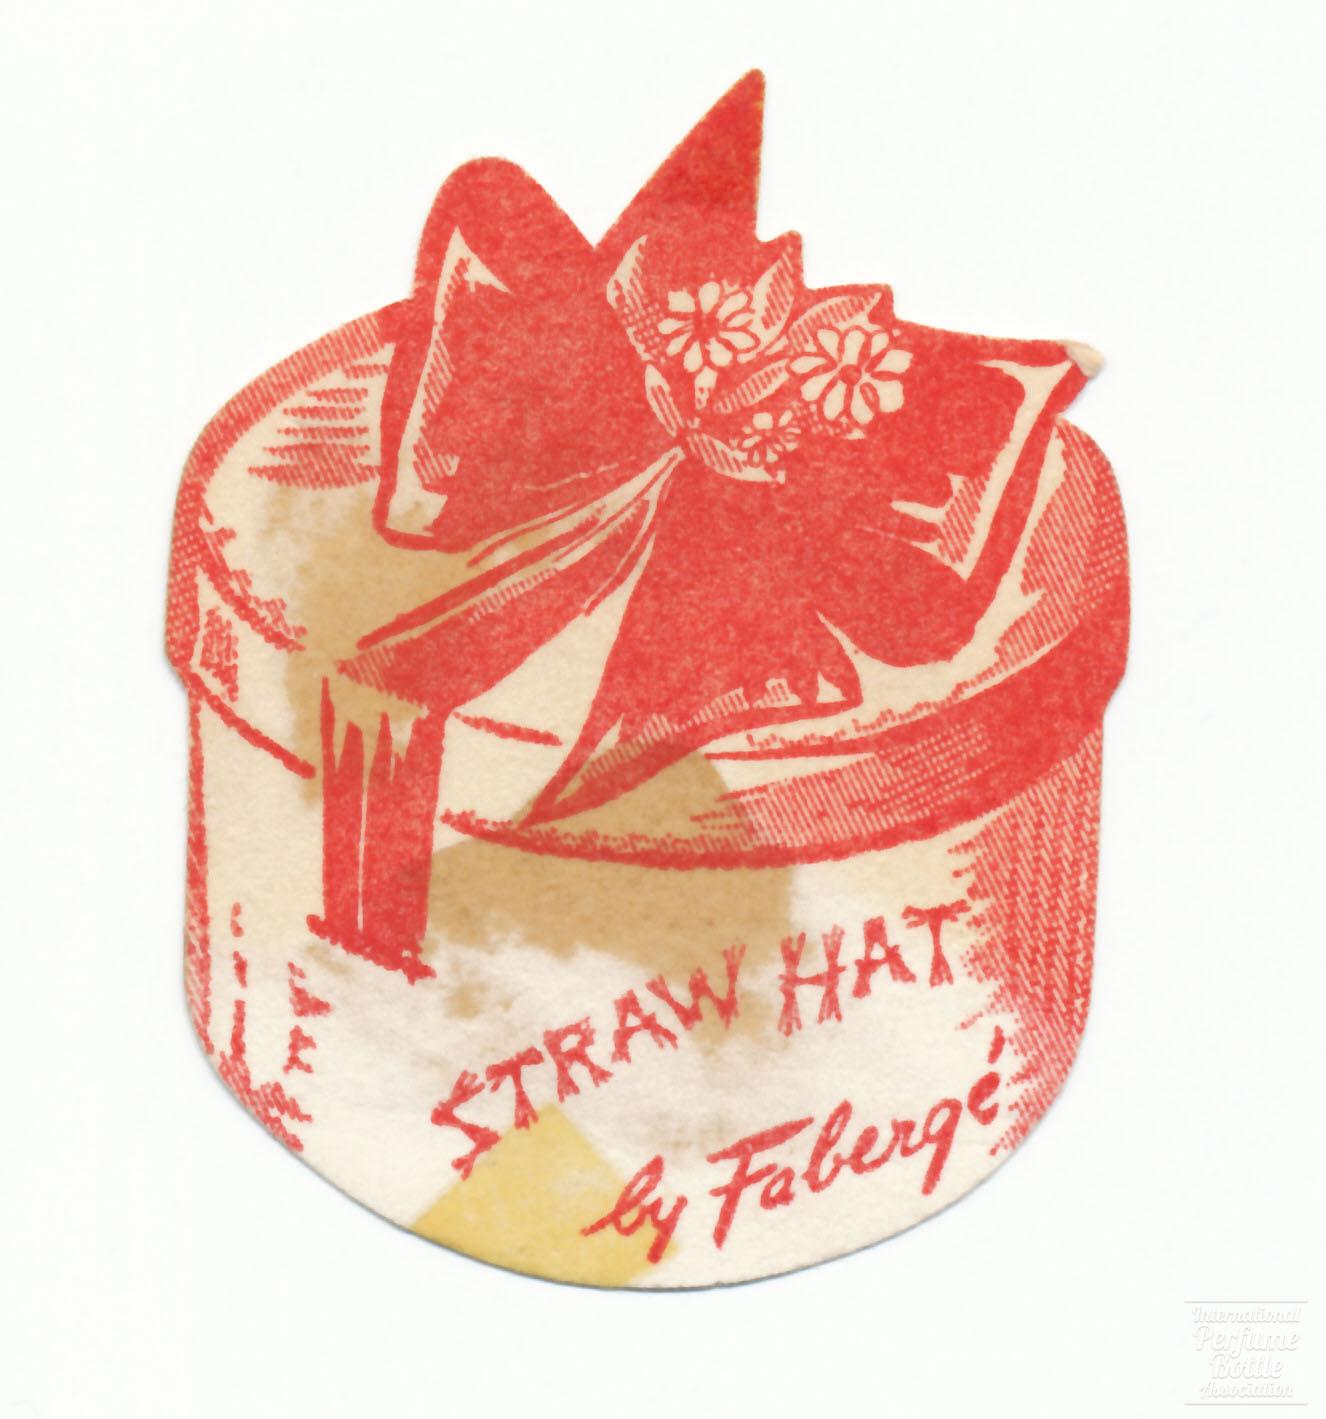 "Straw Hat" Scent Card by Fabergé Perfumes